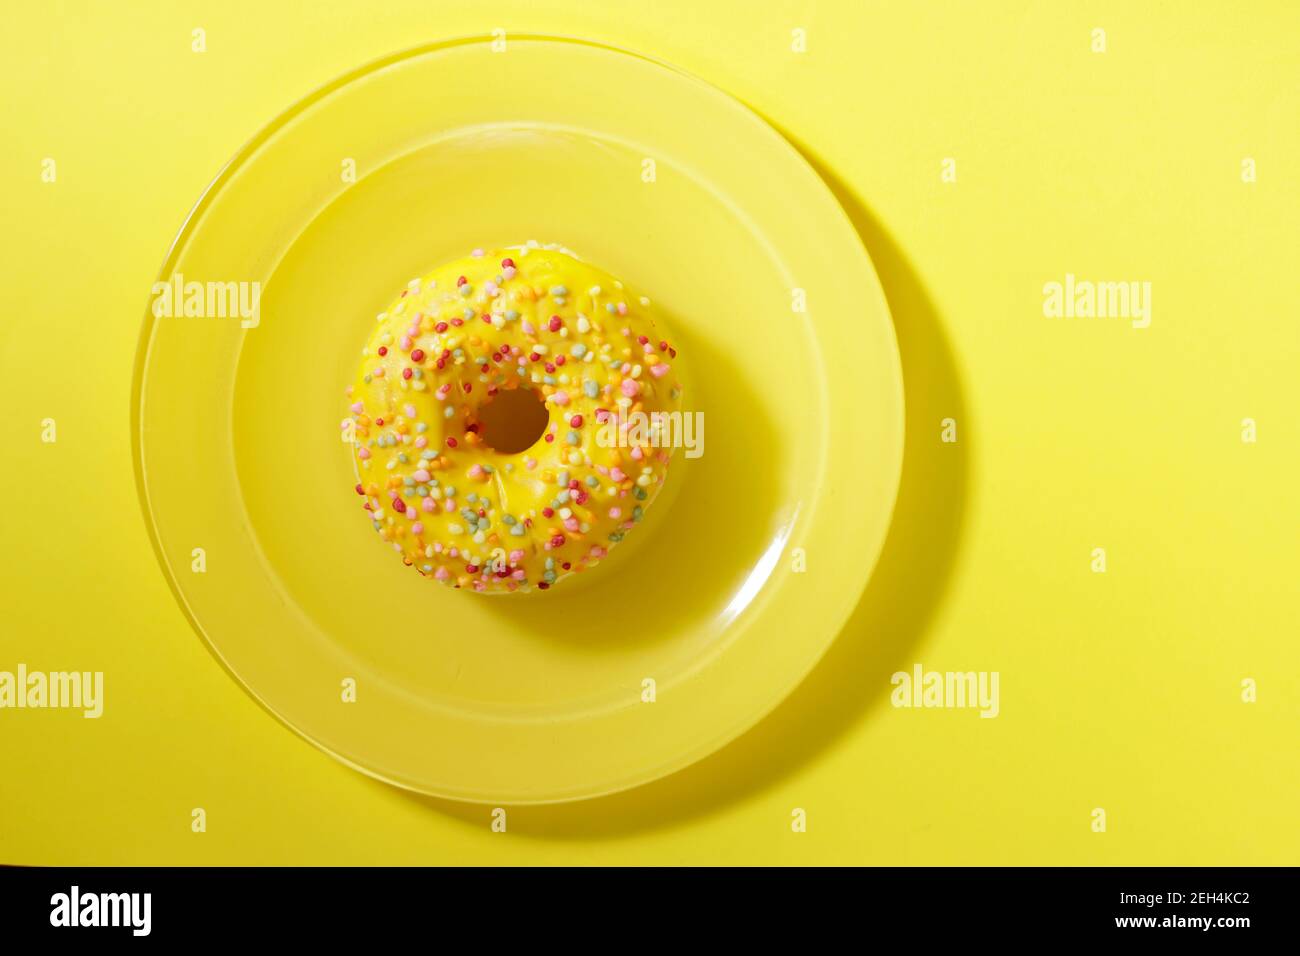 top view of donut with color toping on yellow plate and flat background Stock Photo